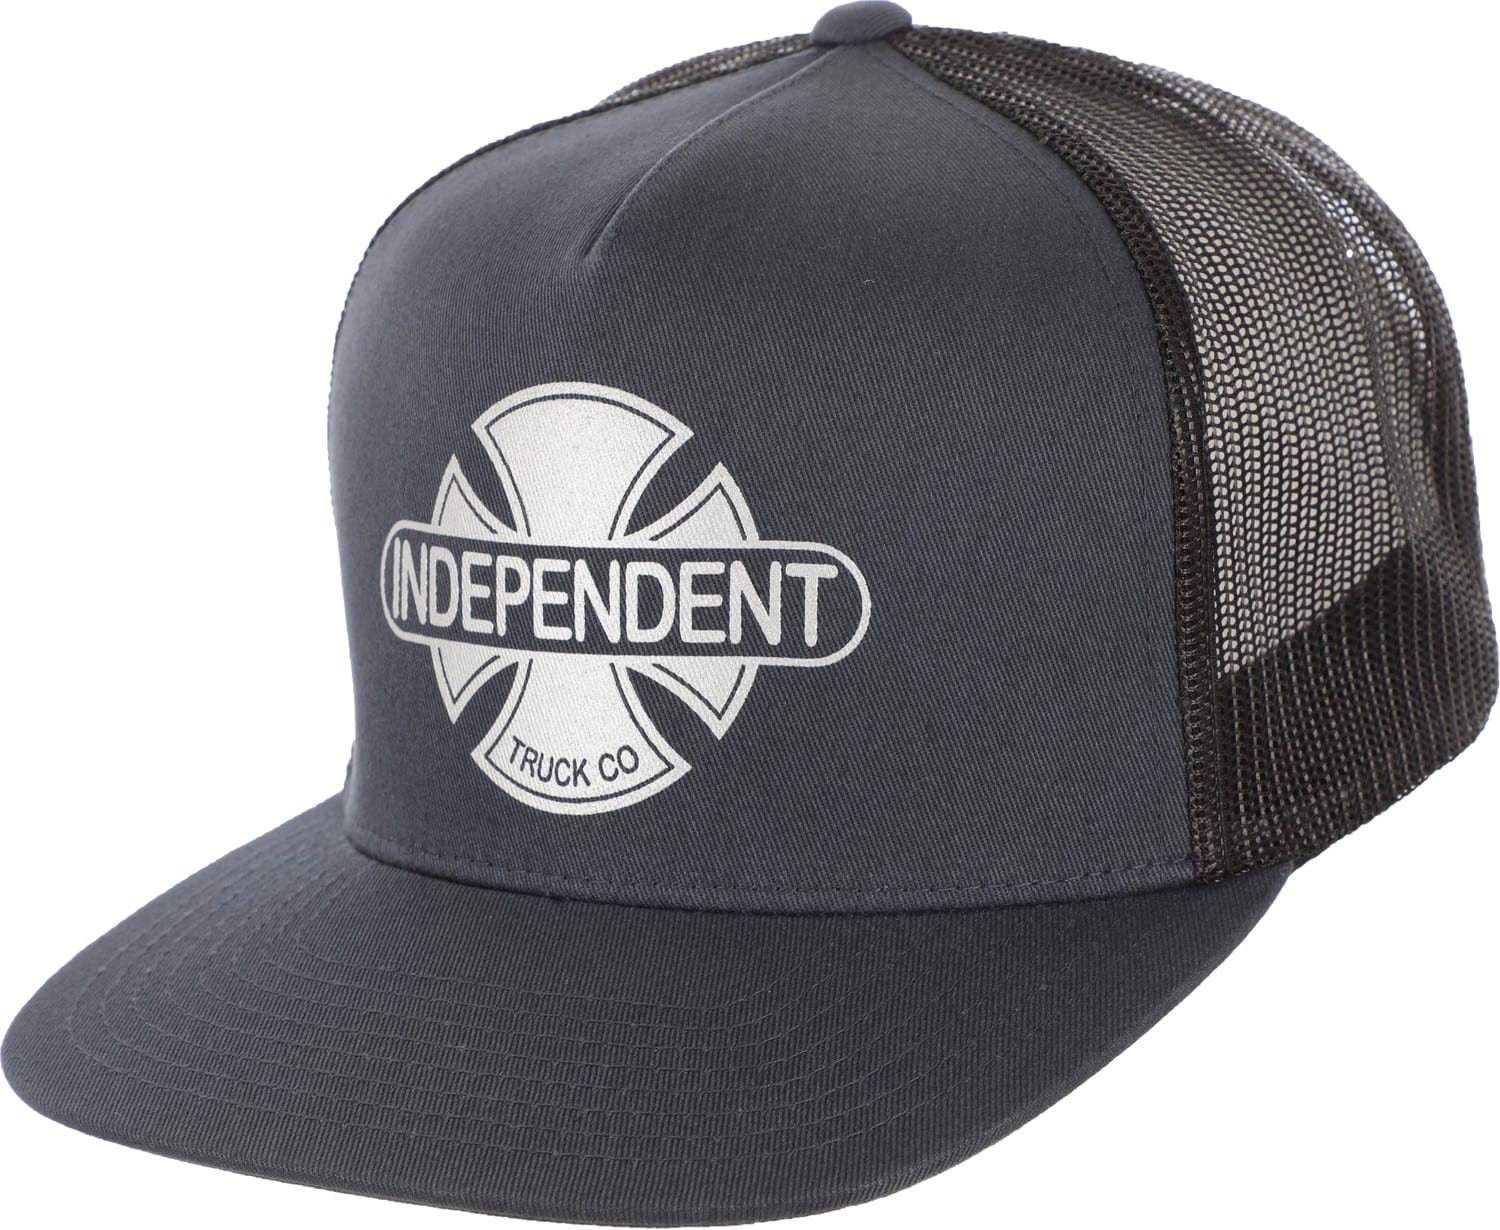 INDEPENDENT MESH TRUCKER BASEPLATE NAVY/SILVER - The Drive Skateshop